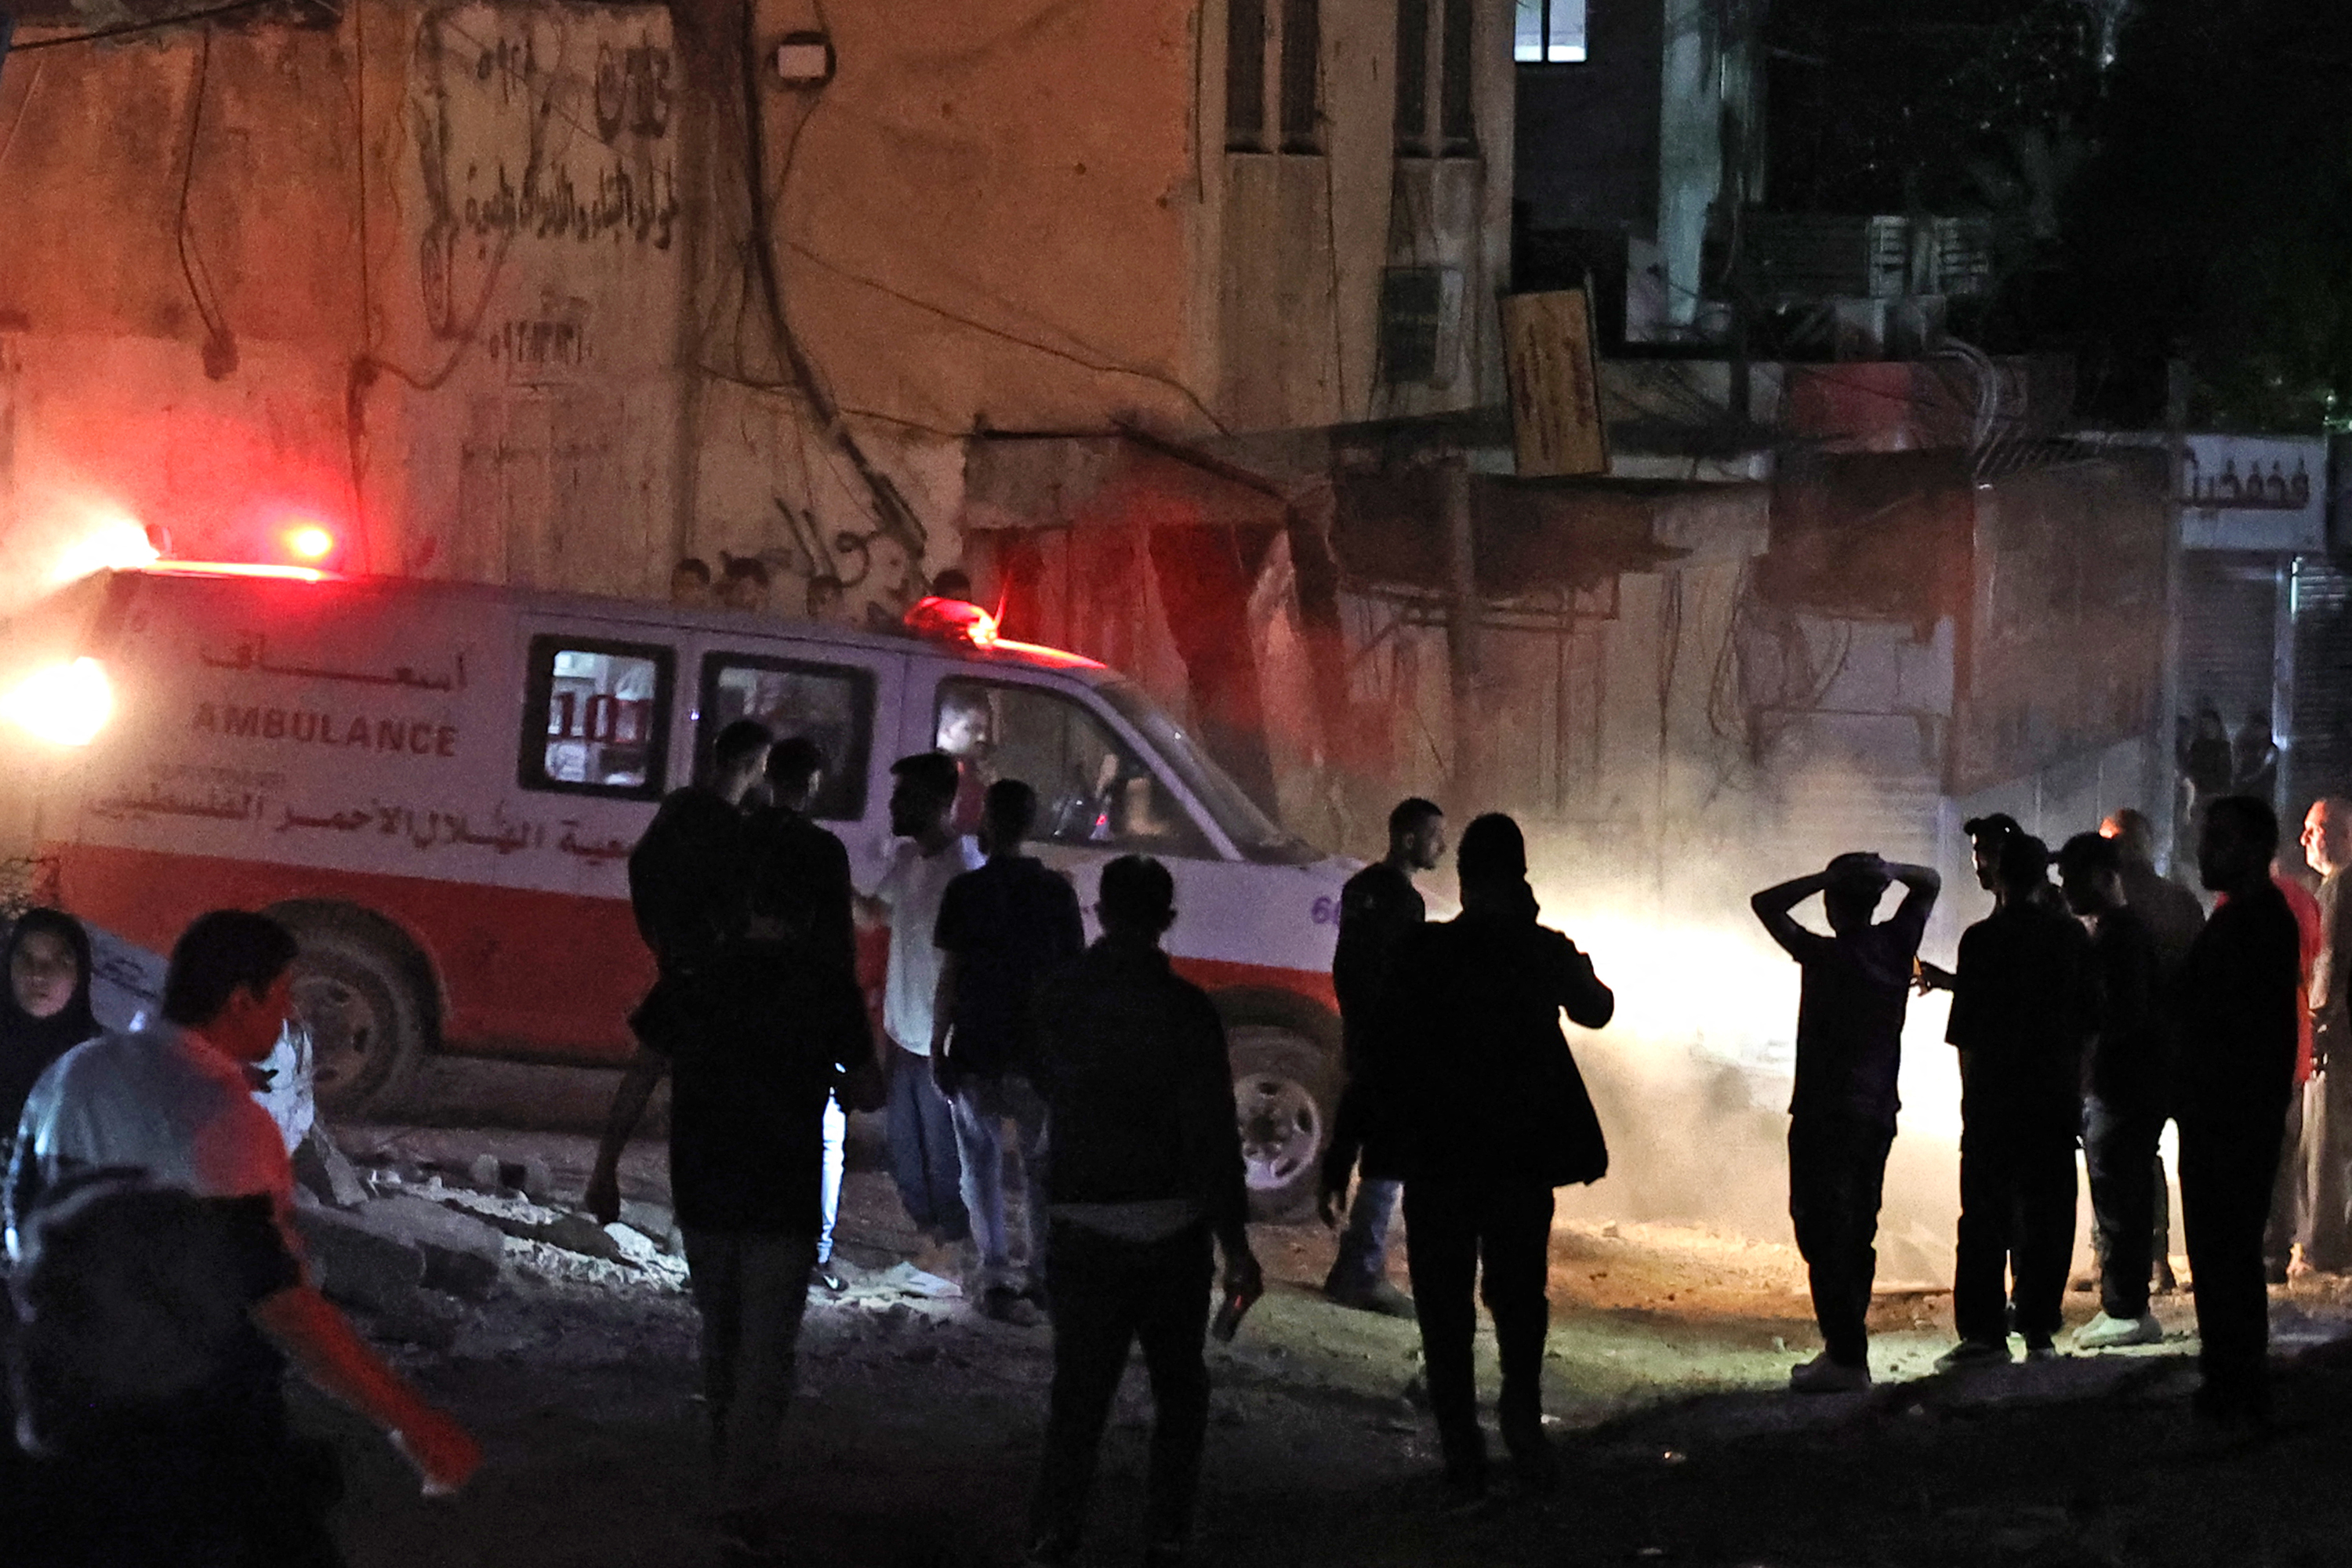 Palestinians gather next to an ambulance following an Israeli raid on a refugee camp in West Bank, on April 20.